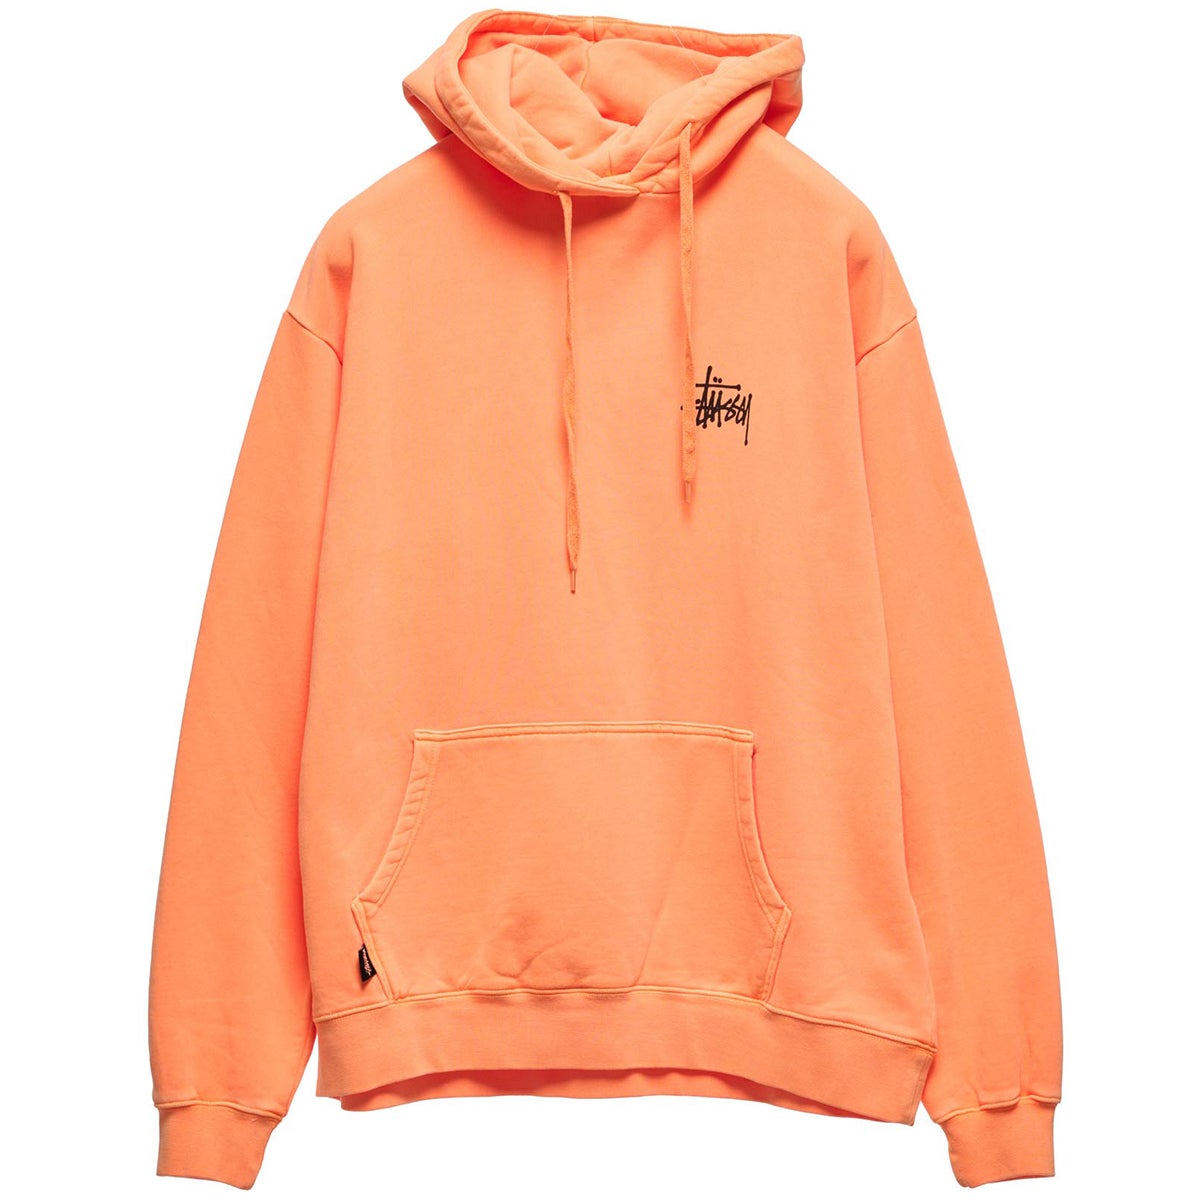 Stussy Extra Tough 50-50 Hood in Pigment Apricot | Boardertown